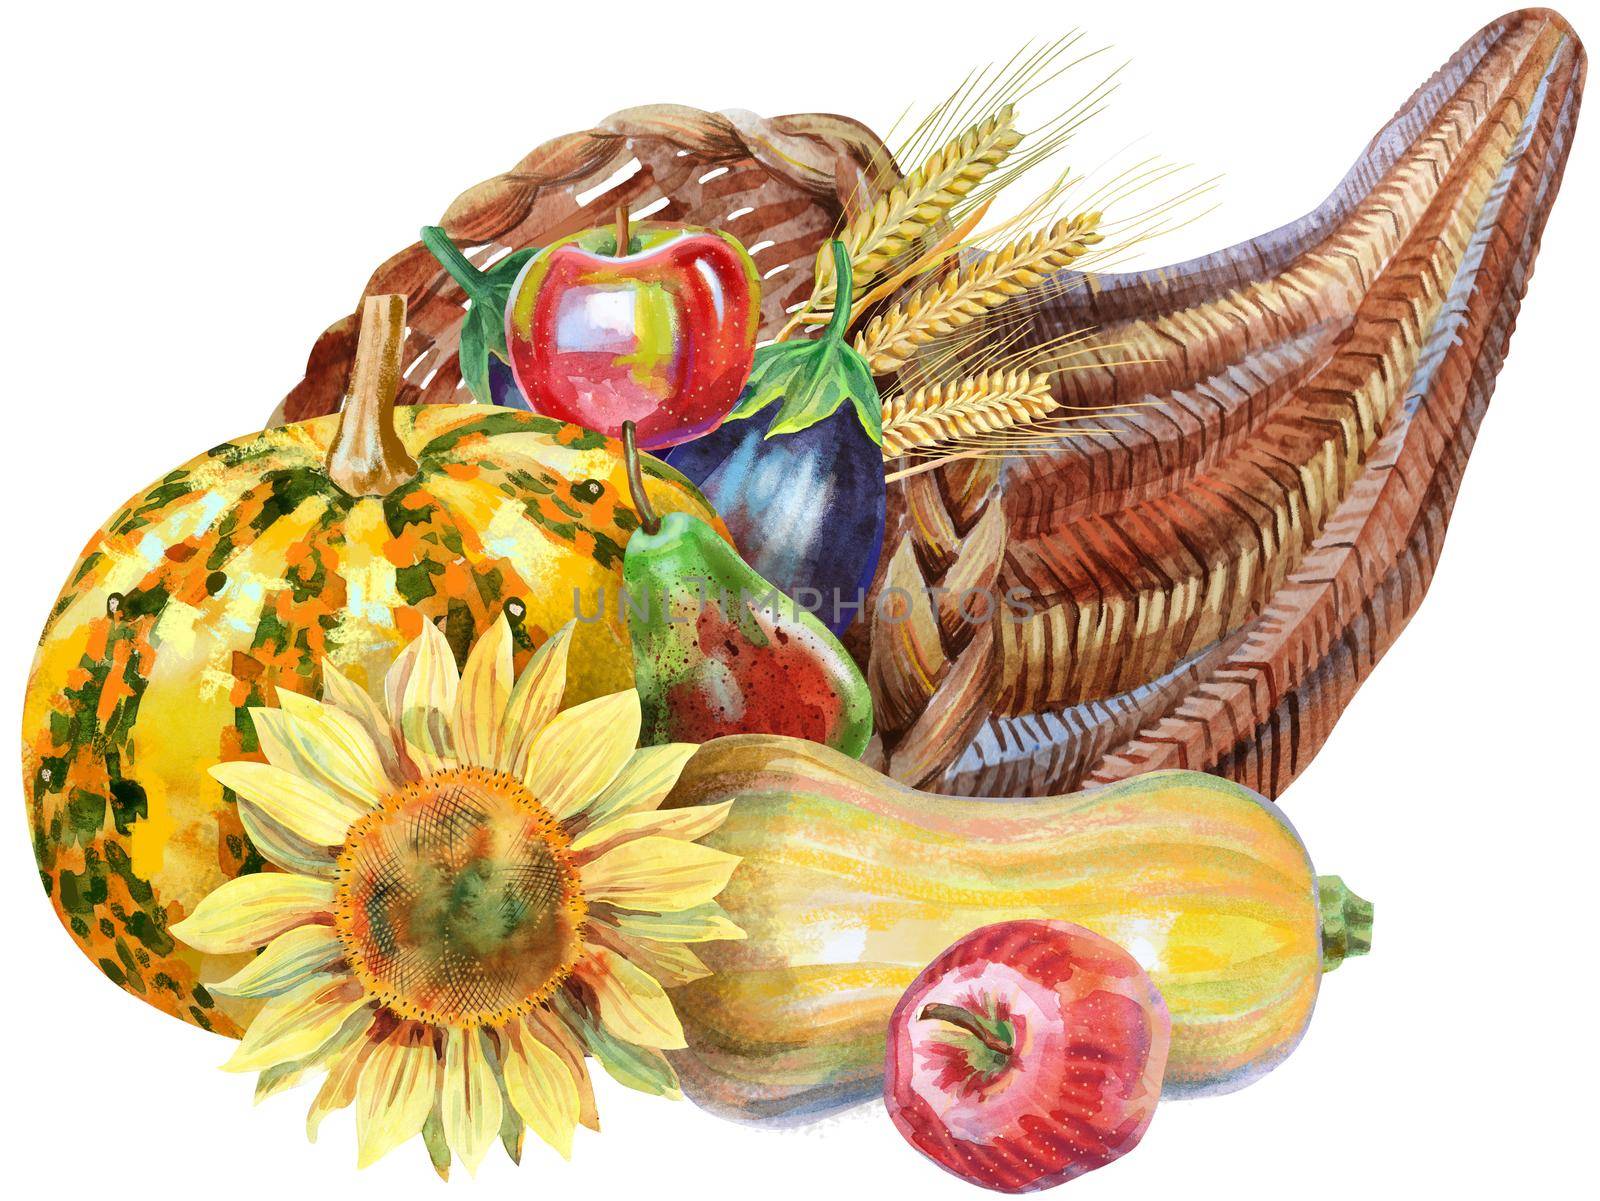 Hand drawn watercolor cornucopia with fall season harvest, pumpkin, sunflower, apple and pears. Food illustration isolated on white background.